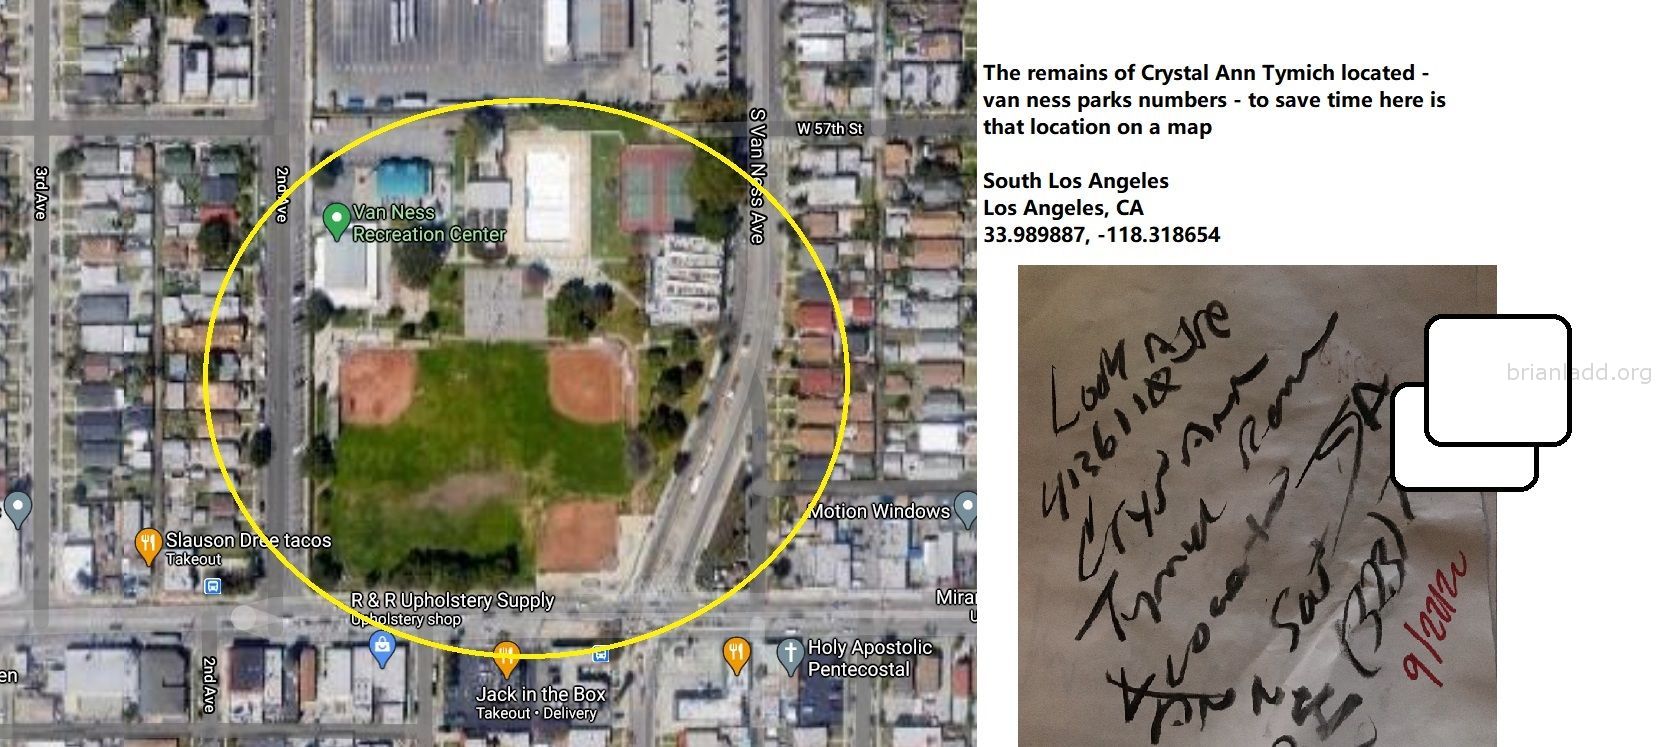 The Remains Of Crystal Ann Tymich Located Van Ness Parks Numbers To Save Time Here Is That Location On A Map - The Remai...
The Remains Of Crystal Ann Tymich Located - Van Ness Parks Numbers - To Save Time Here Is That Location On A Map  South Los Angeles  Los Angeles, Ca  33.989887, -118.318654  Case At   https://briansprediction.com/Crystal-Ann-Tymich
